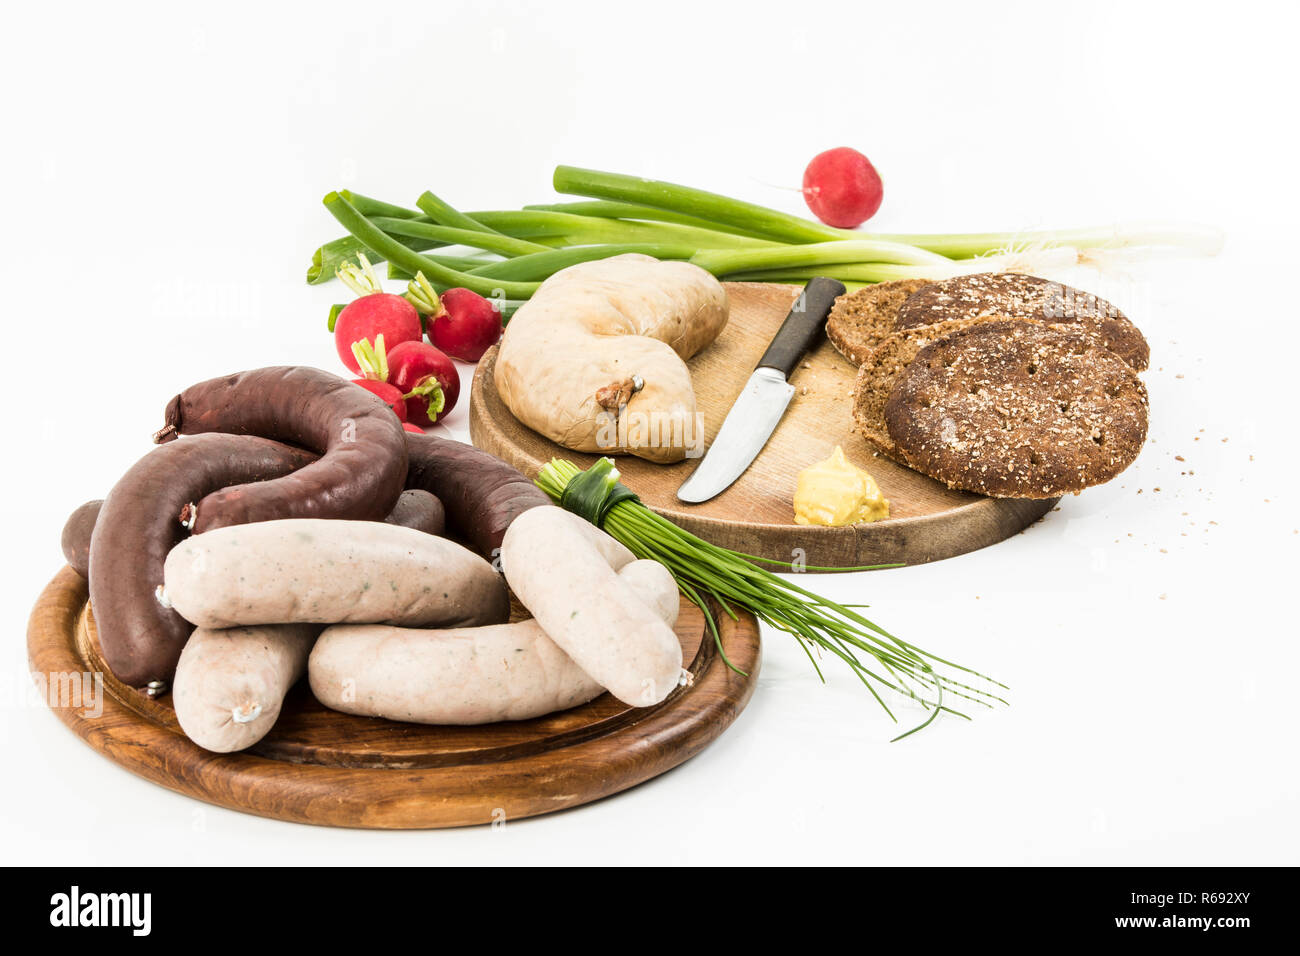 Liverwurst, Blood Sausage, Green Onions, Radish, Chives, Mustard And Bread Stock Photo